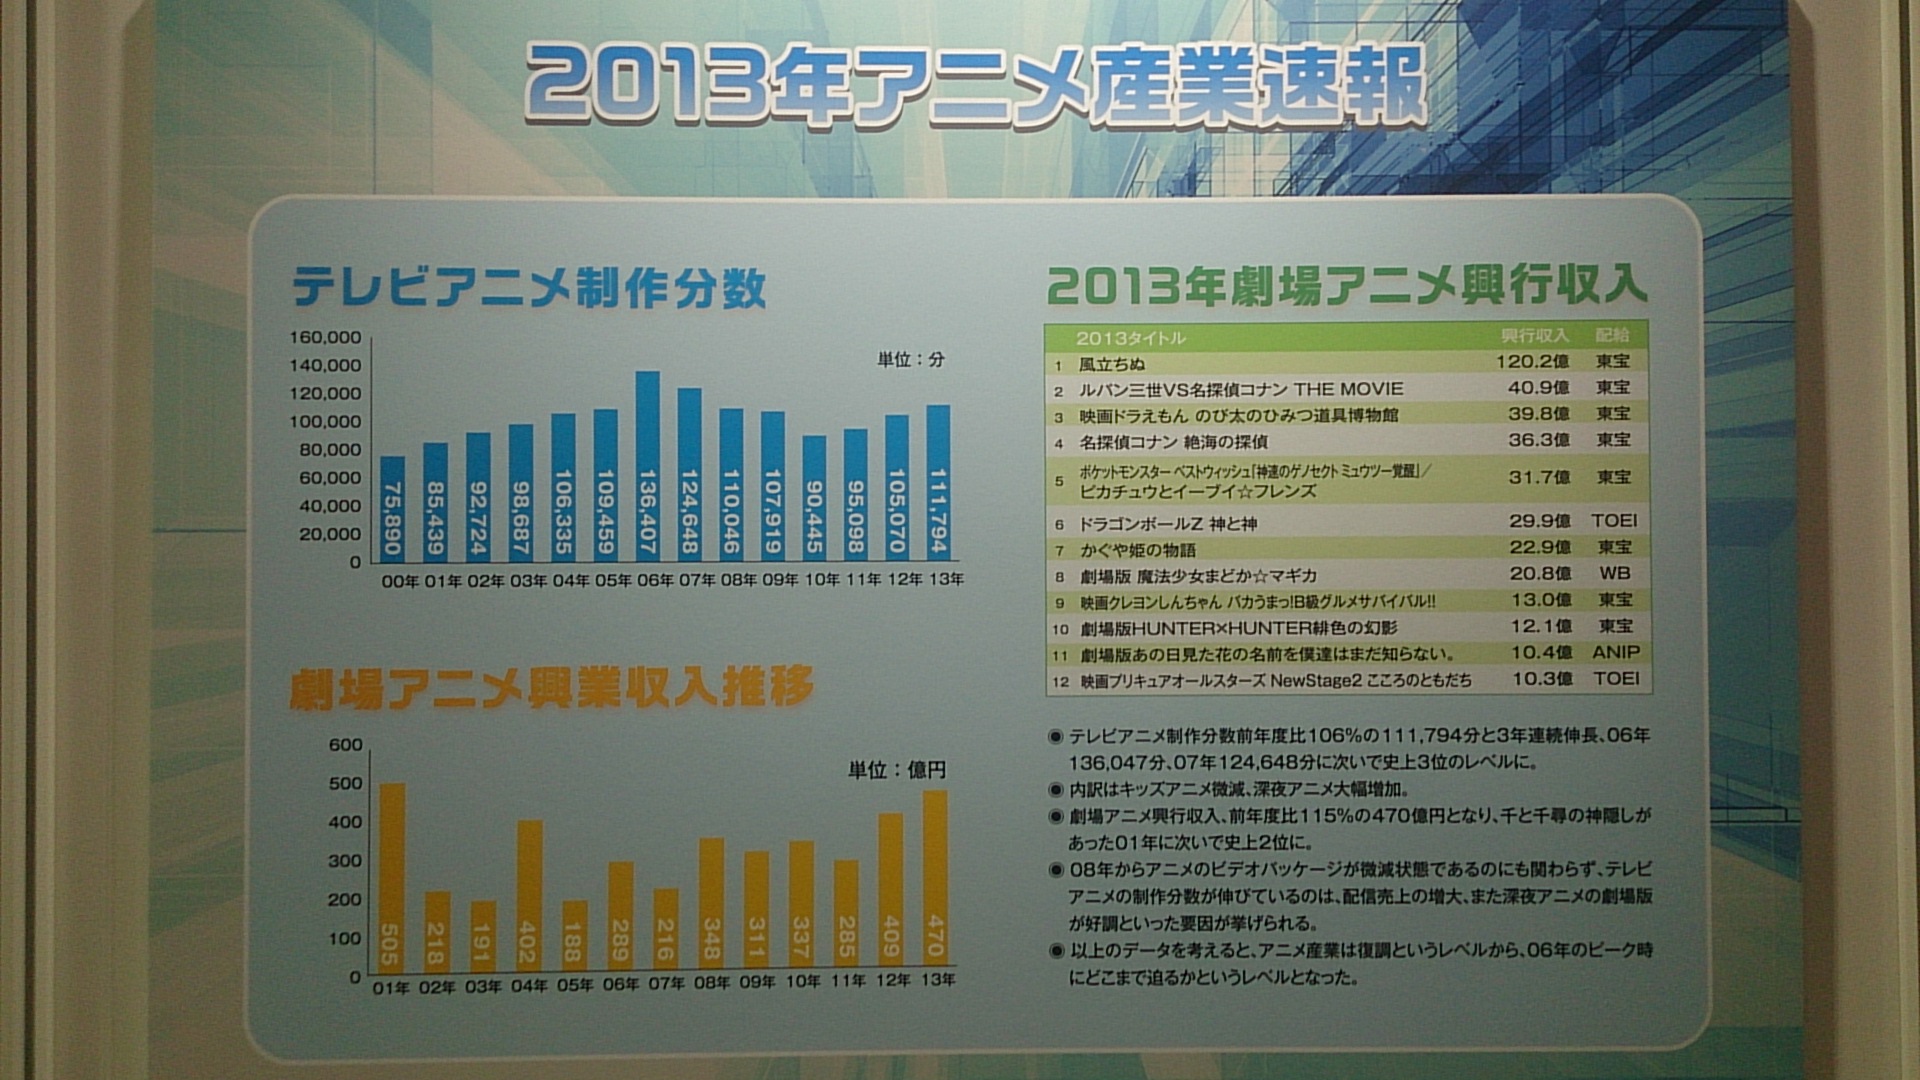 2013 Anime Industry Gross Profits & Sales Pic 1